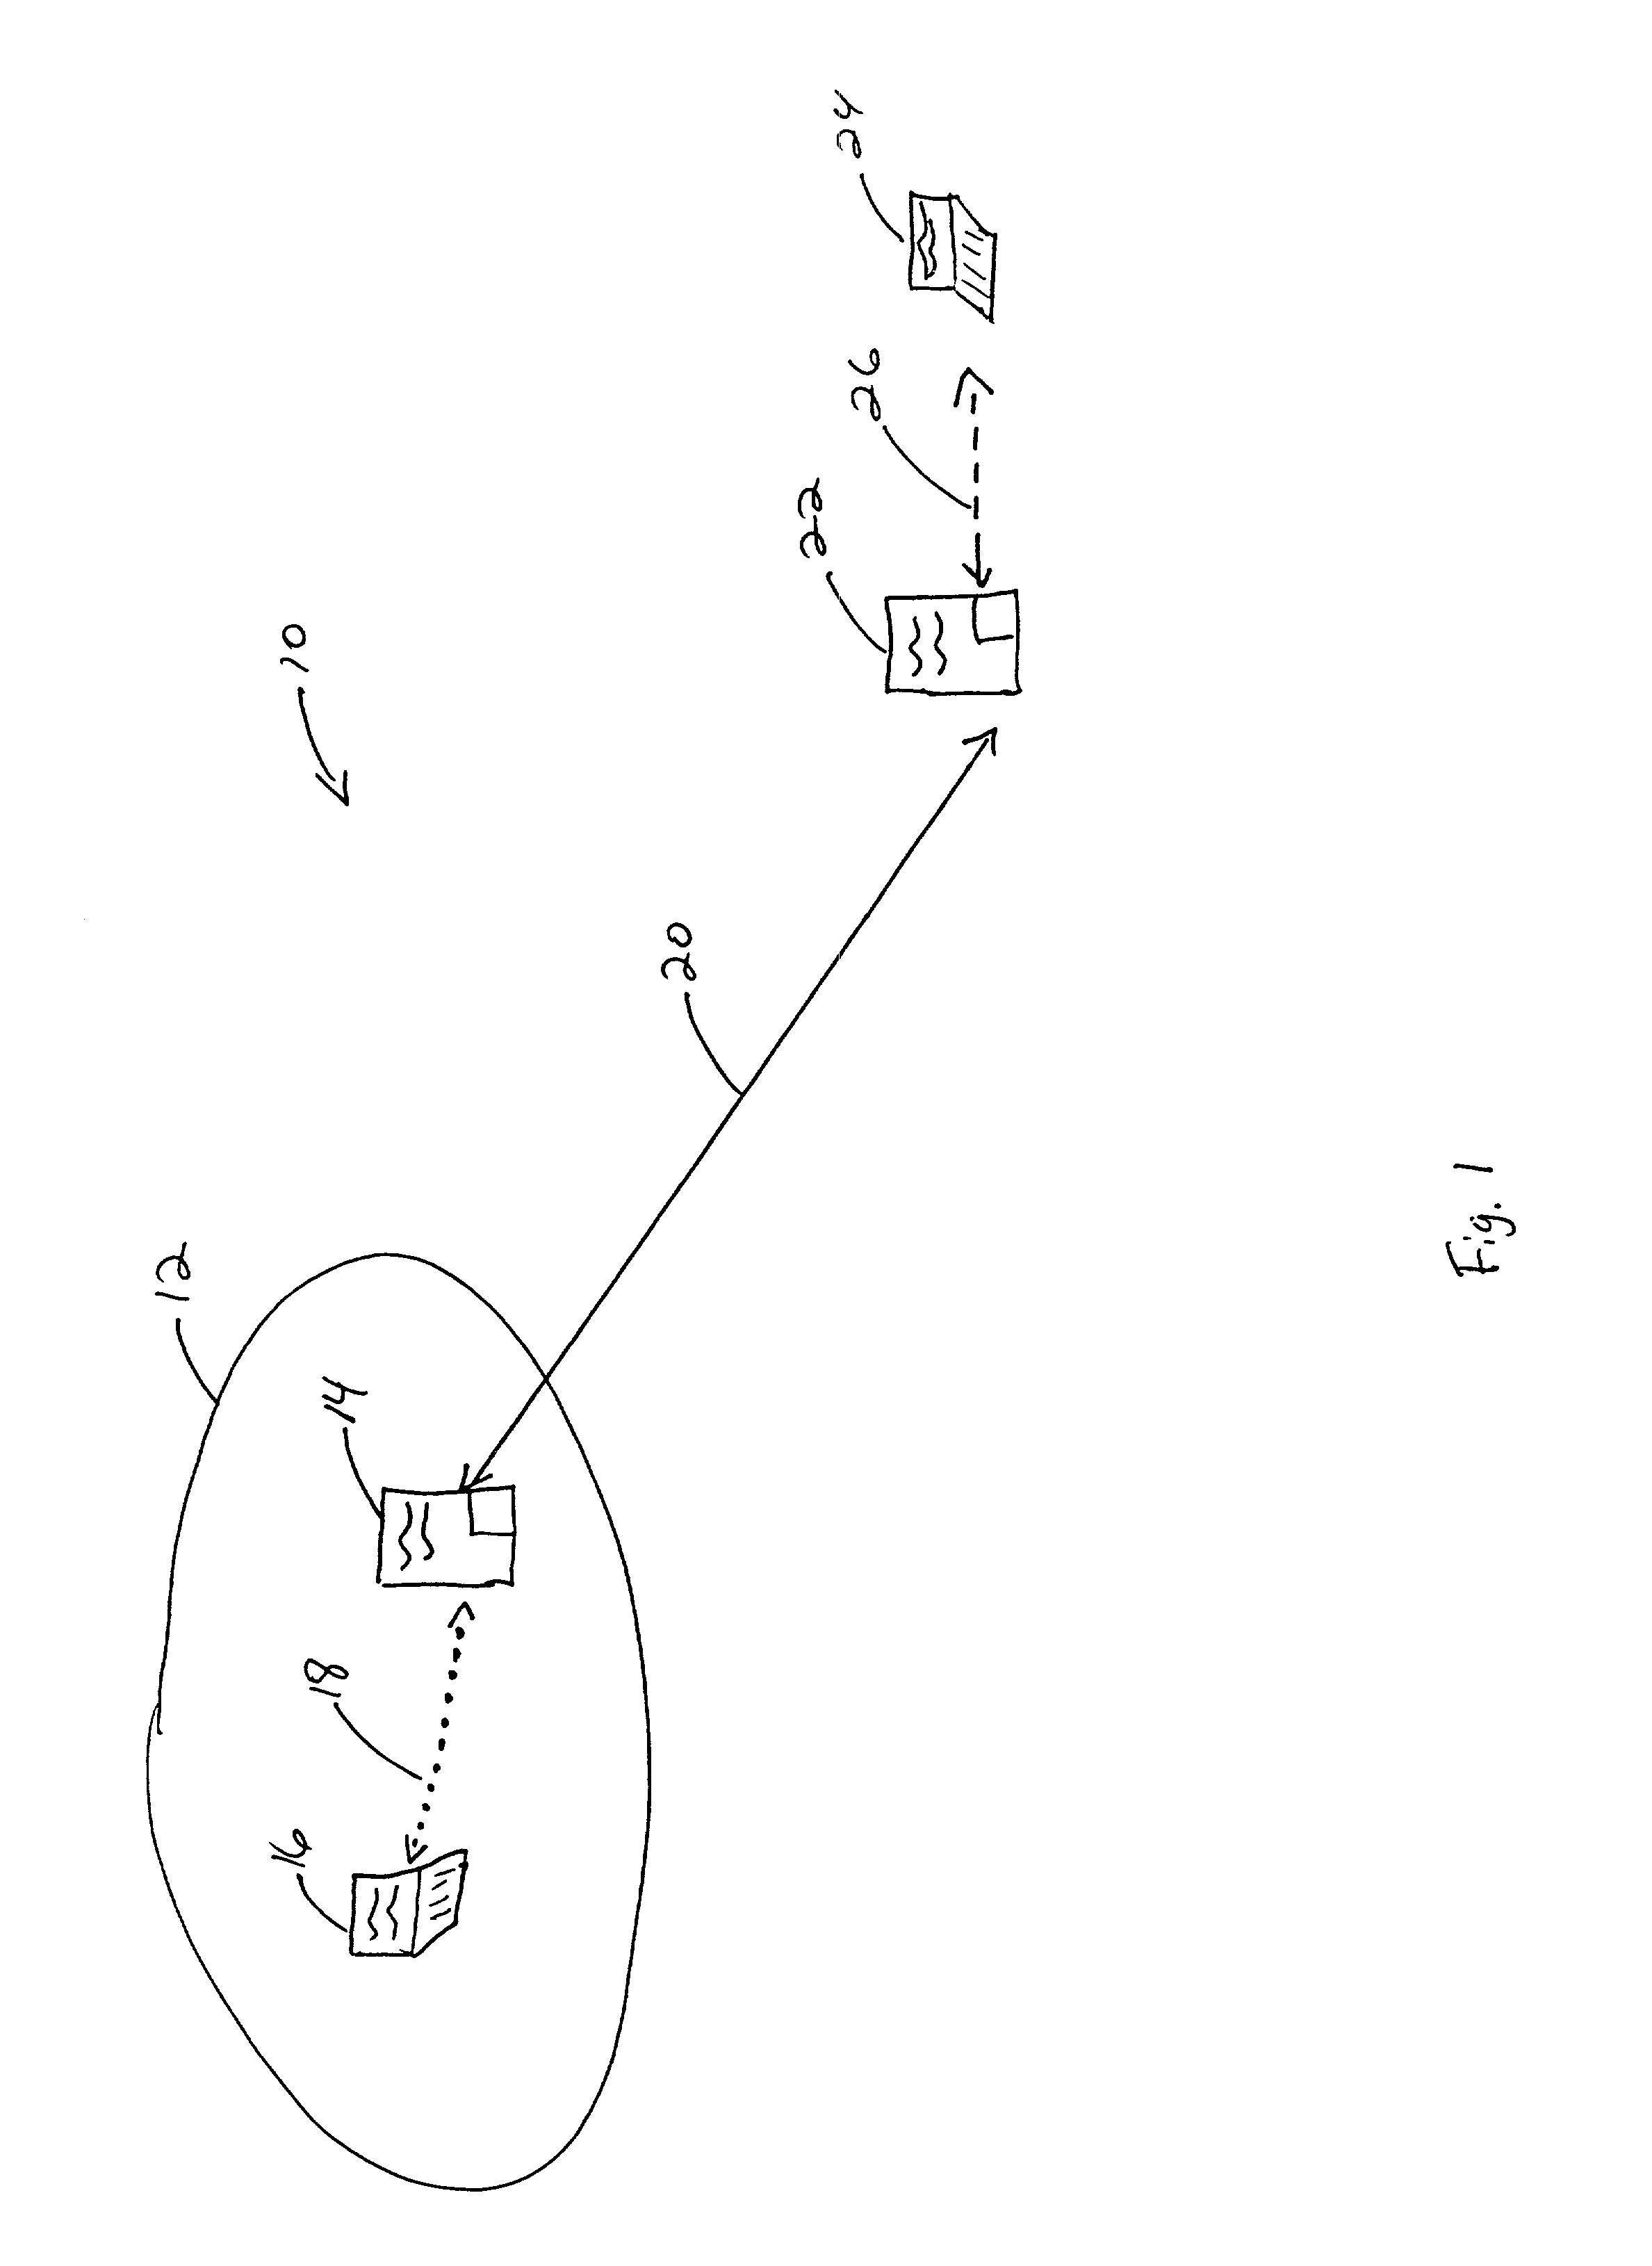 System and method for secure network mobility